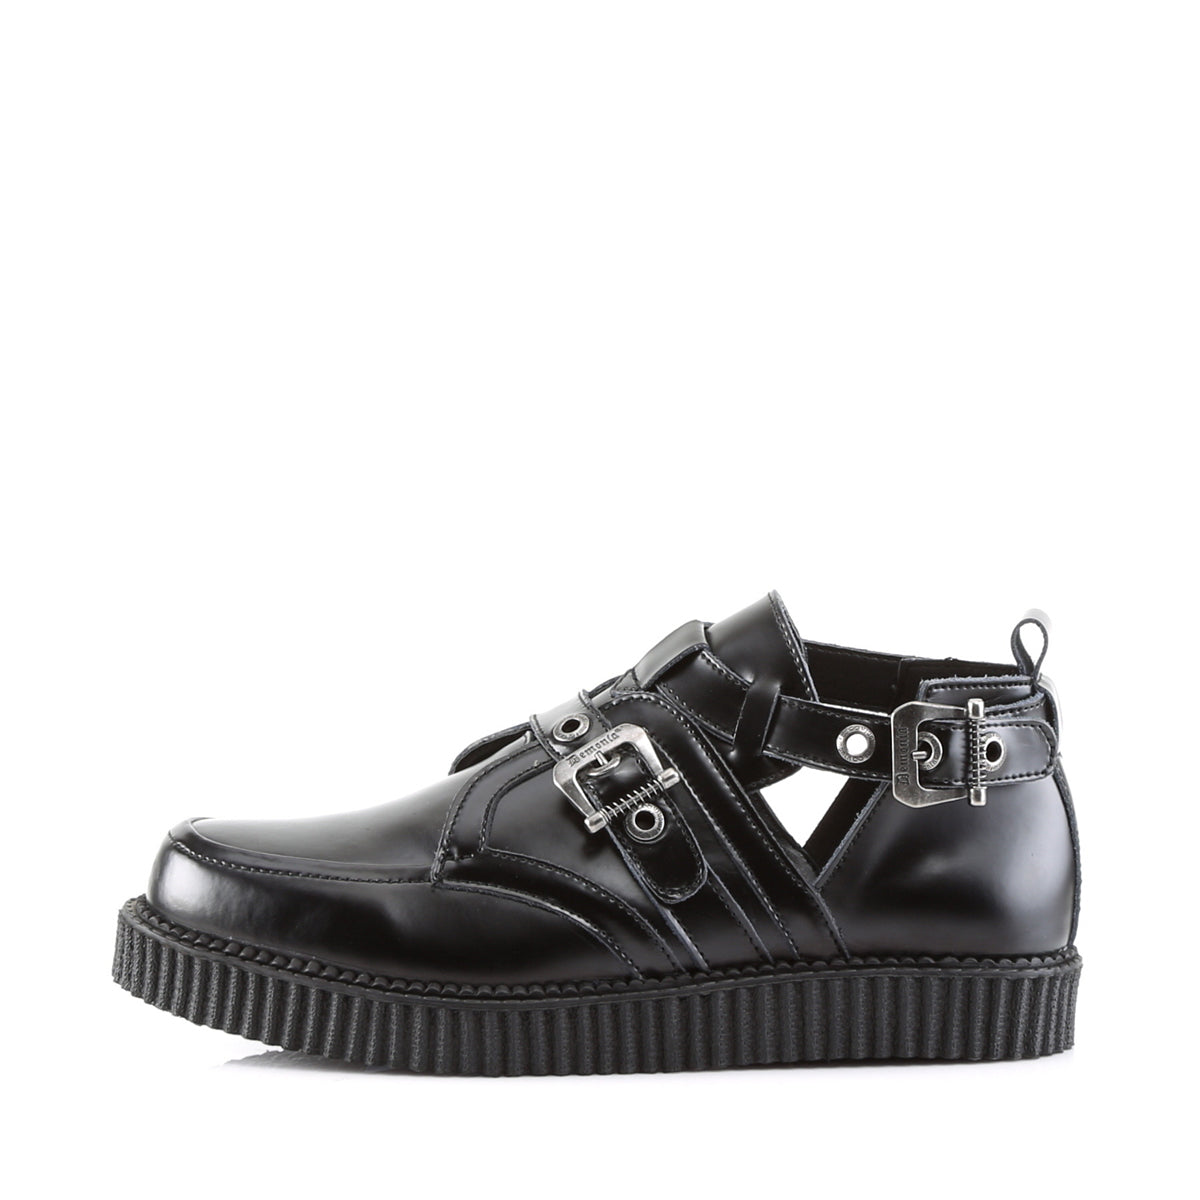 DemoniaCult Mens Low Shoe CREEPER-615 Blk Leather